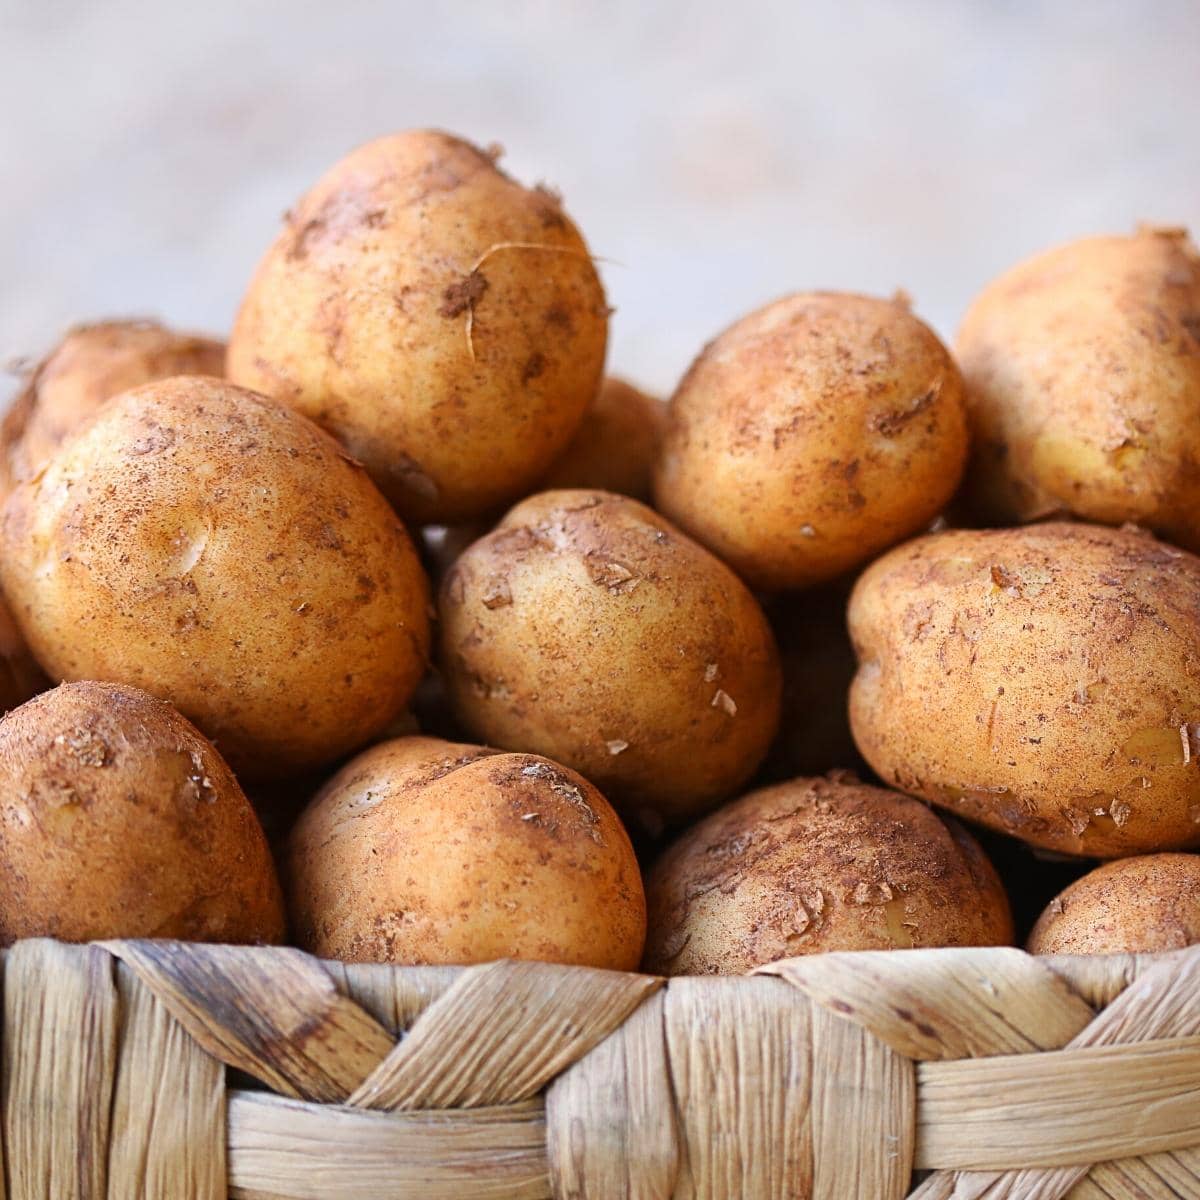 A wooden basket filled with light brown potatoes.